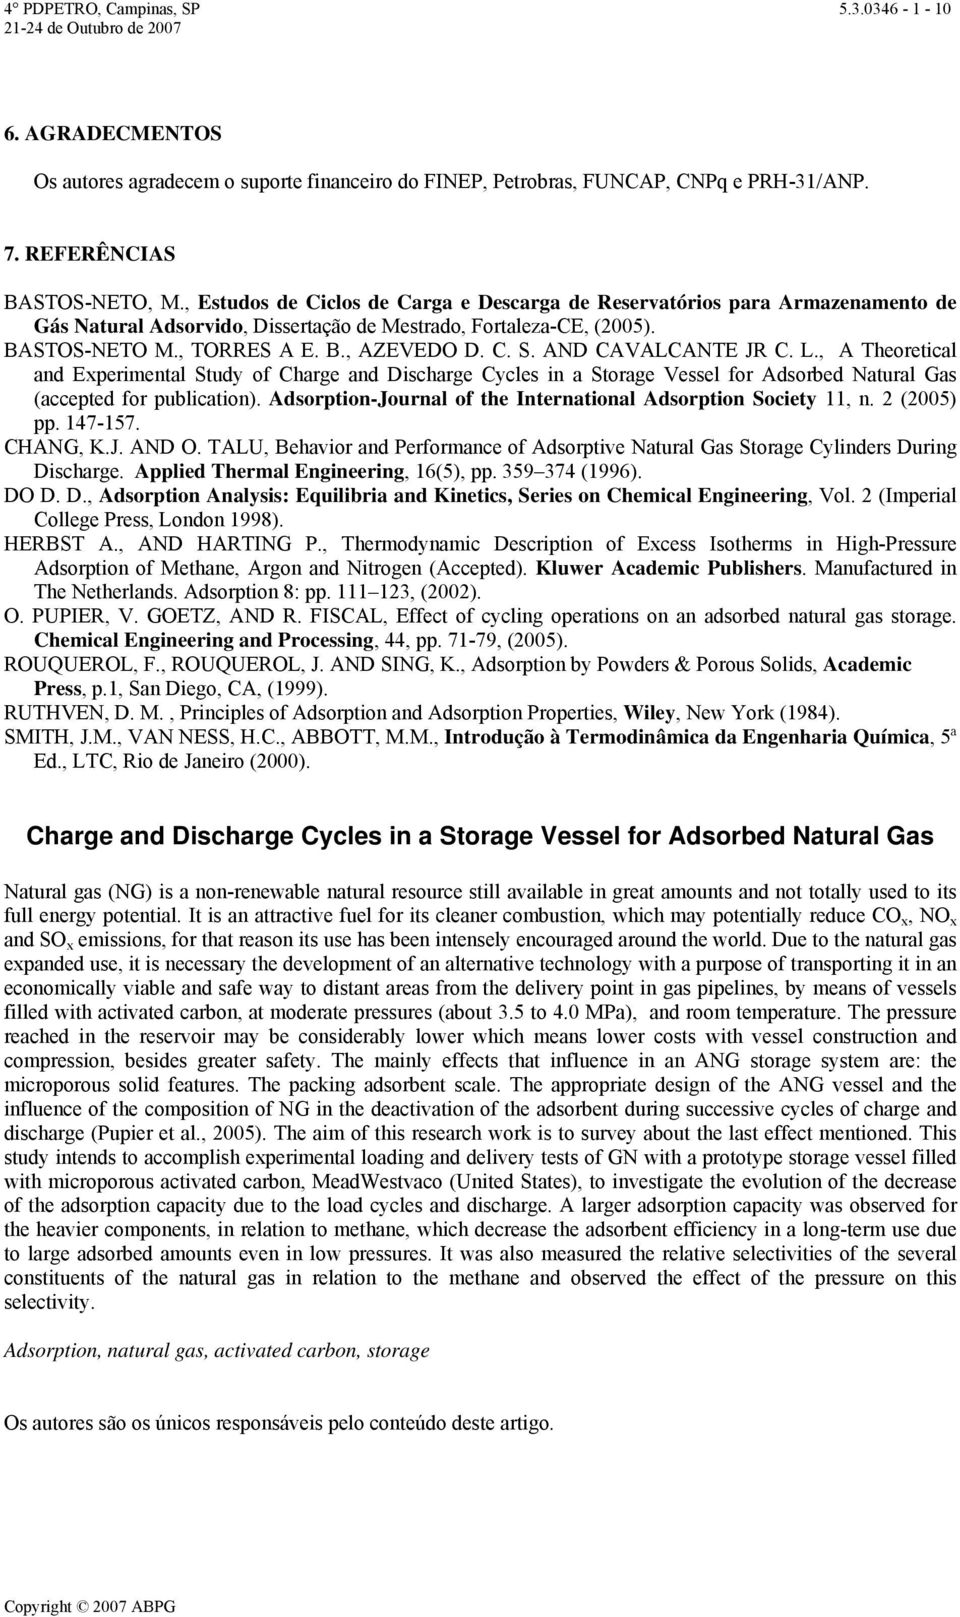 L., A Theoretical and Experiental tudy of Charge and Discharge Cycles in a torage Vessel for Adsorbed Natural Gas (accepted for publication).